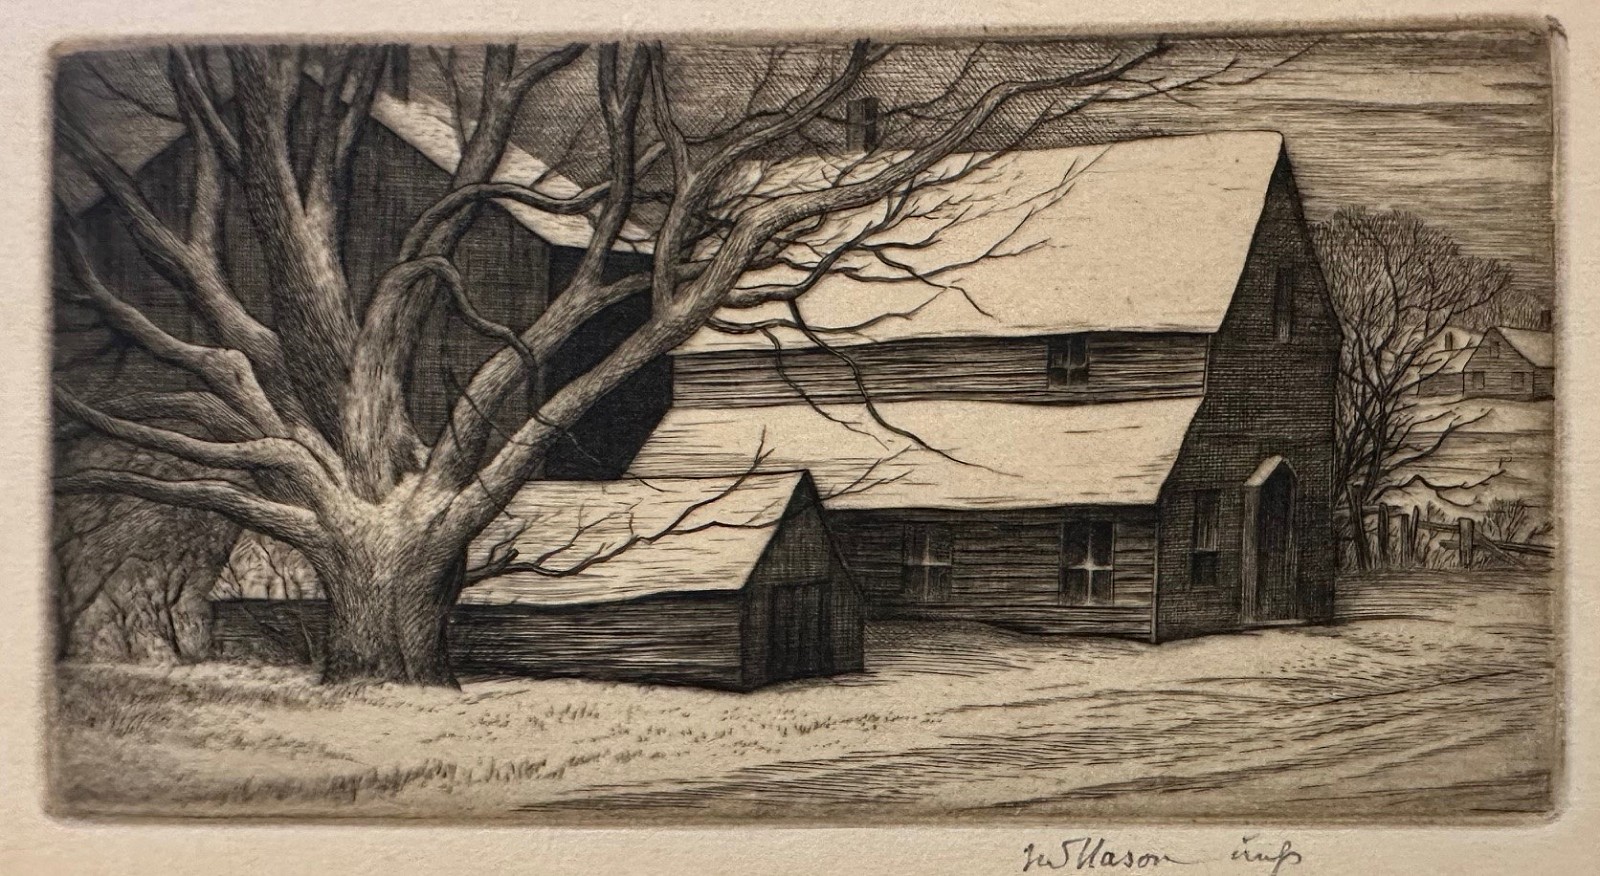 Thomas Willoughby Nason, Early Snow, 1934
copper engraving second state   ed. 65, 2 1/2"" x 4 3/4""
JCA 6778.01
$950